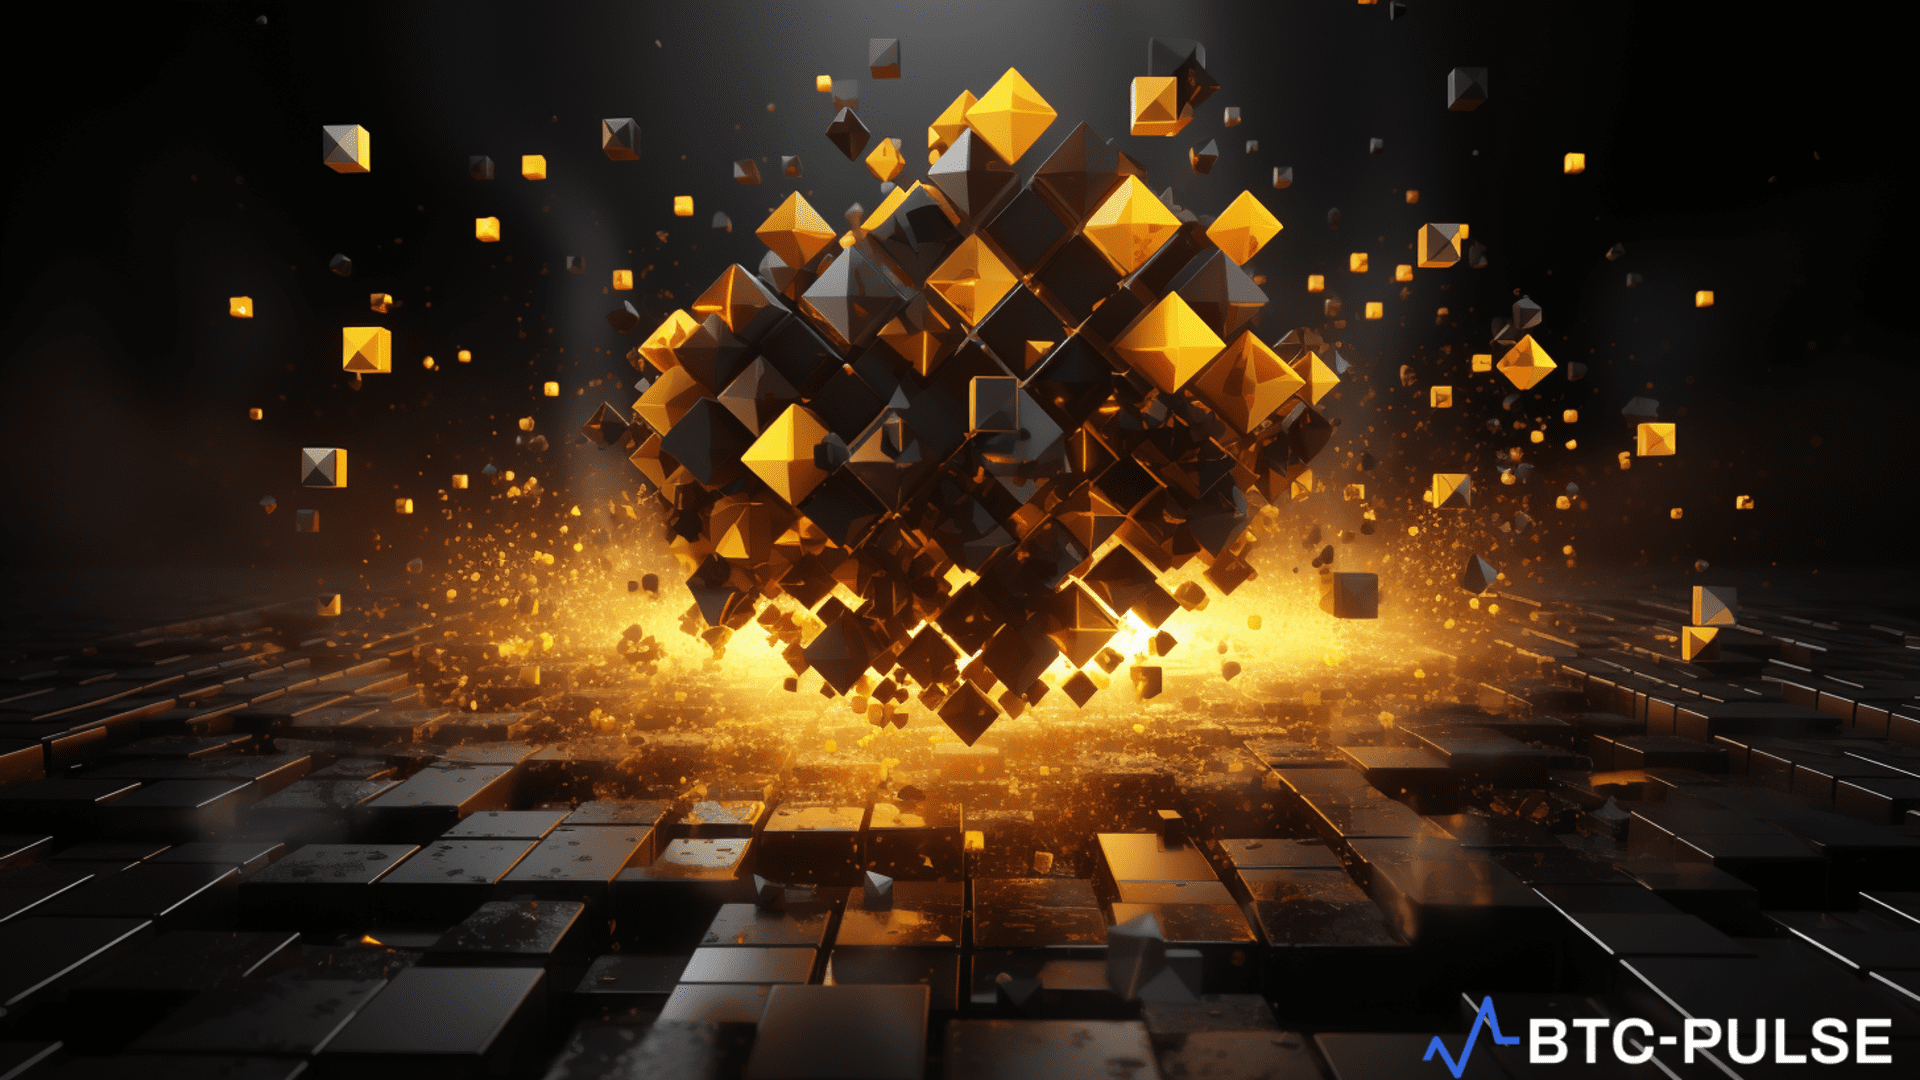 Binance to Delist Four Cryptos, Citing Lack of Industry Standards